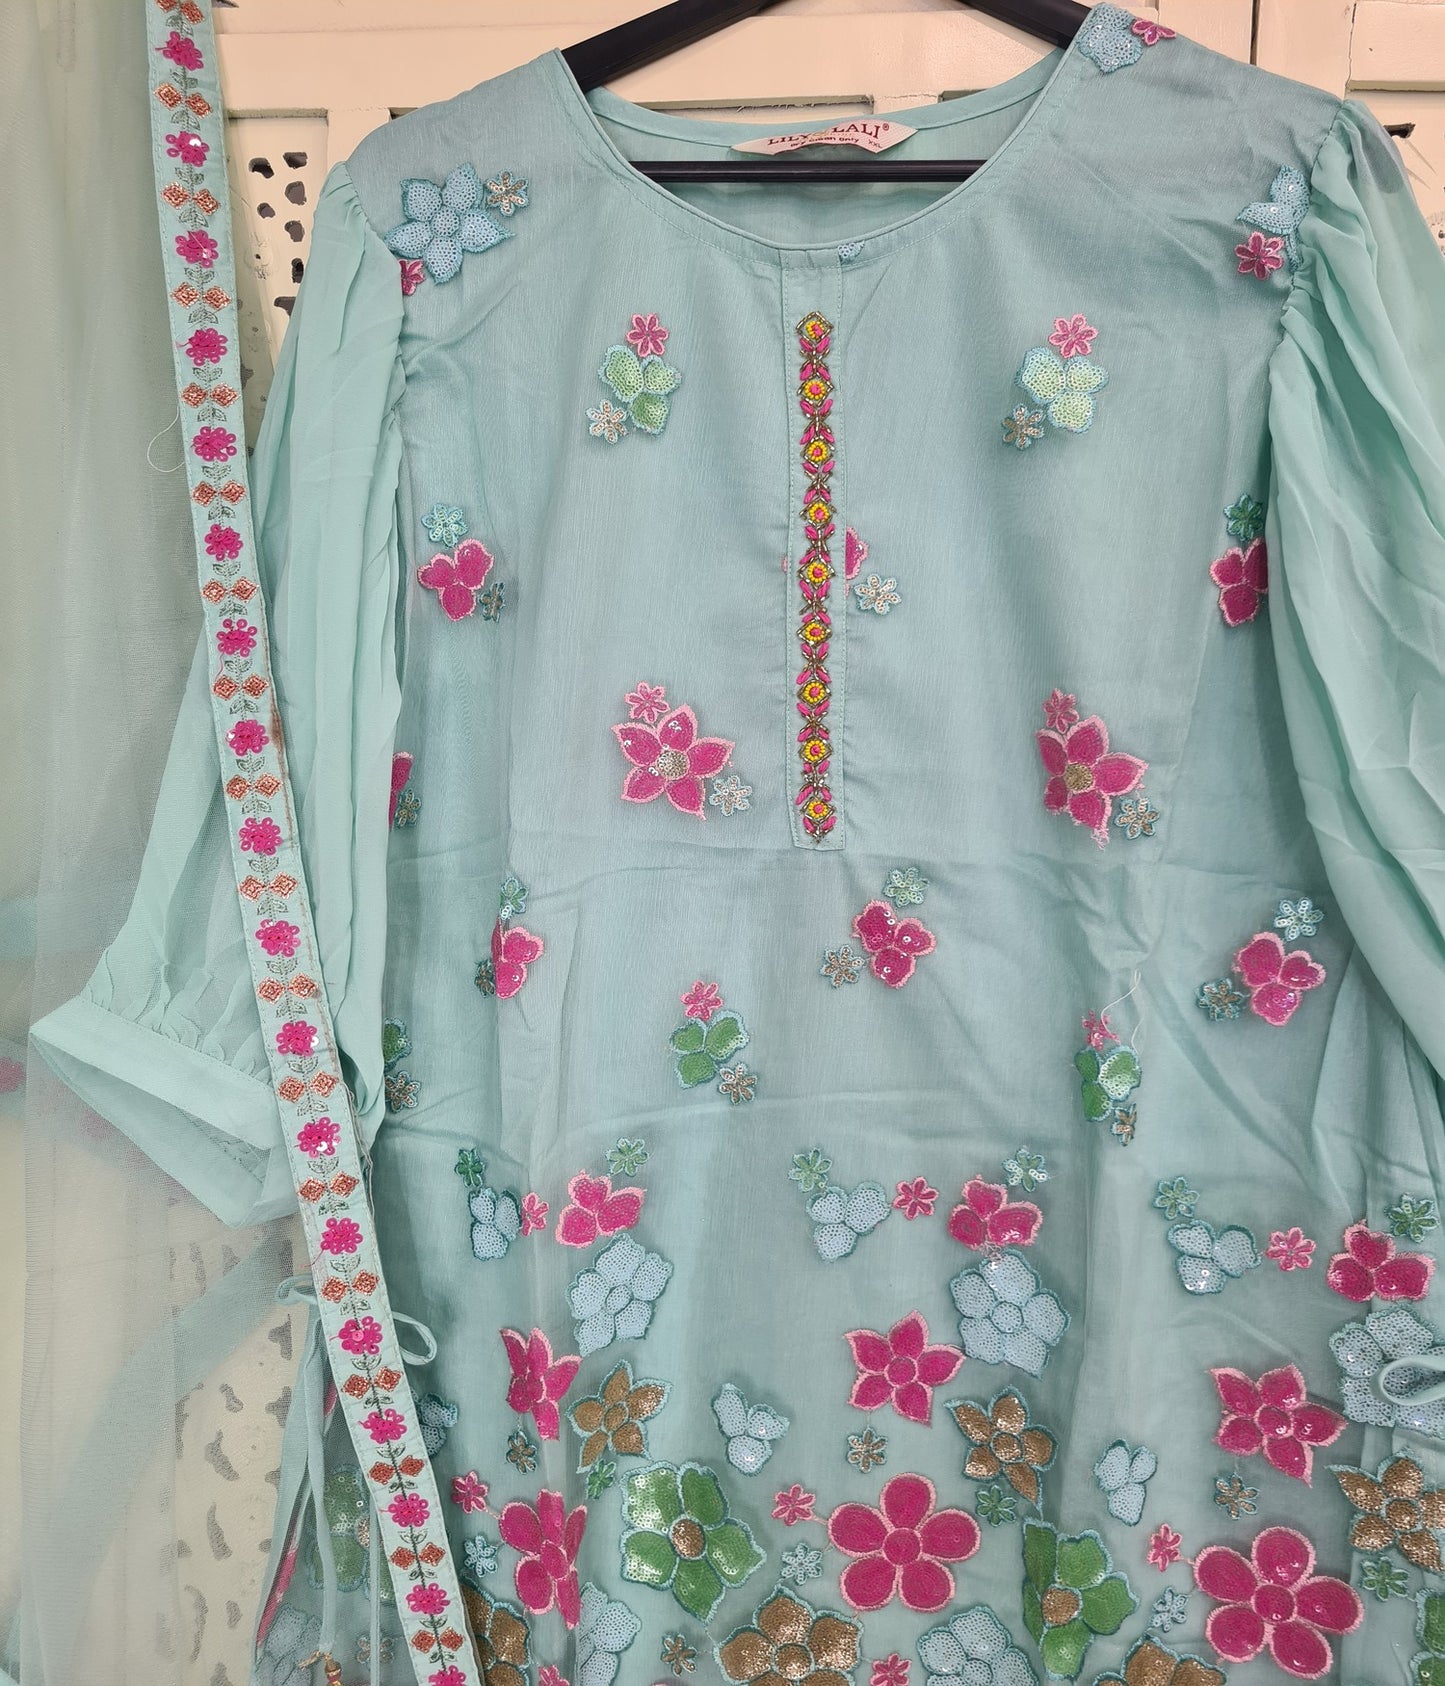 Straight Partywear Kurta Set in Sky Blue-spendworthclothing-Color_Blue,Cotton-Suits-sets,Easy-Returns,Free-Shipping,Item Type_Cotton Suits Sets,Material_Silk/Net,Size_Large,Size_Medium,Size_Small,Size_XL,Speedy-Deliveries,SUIT-SETS